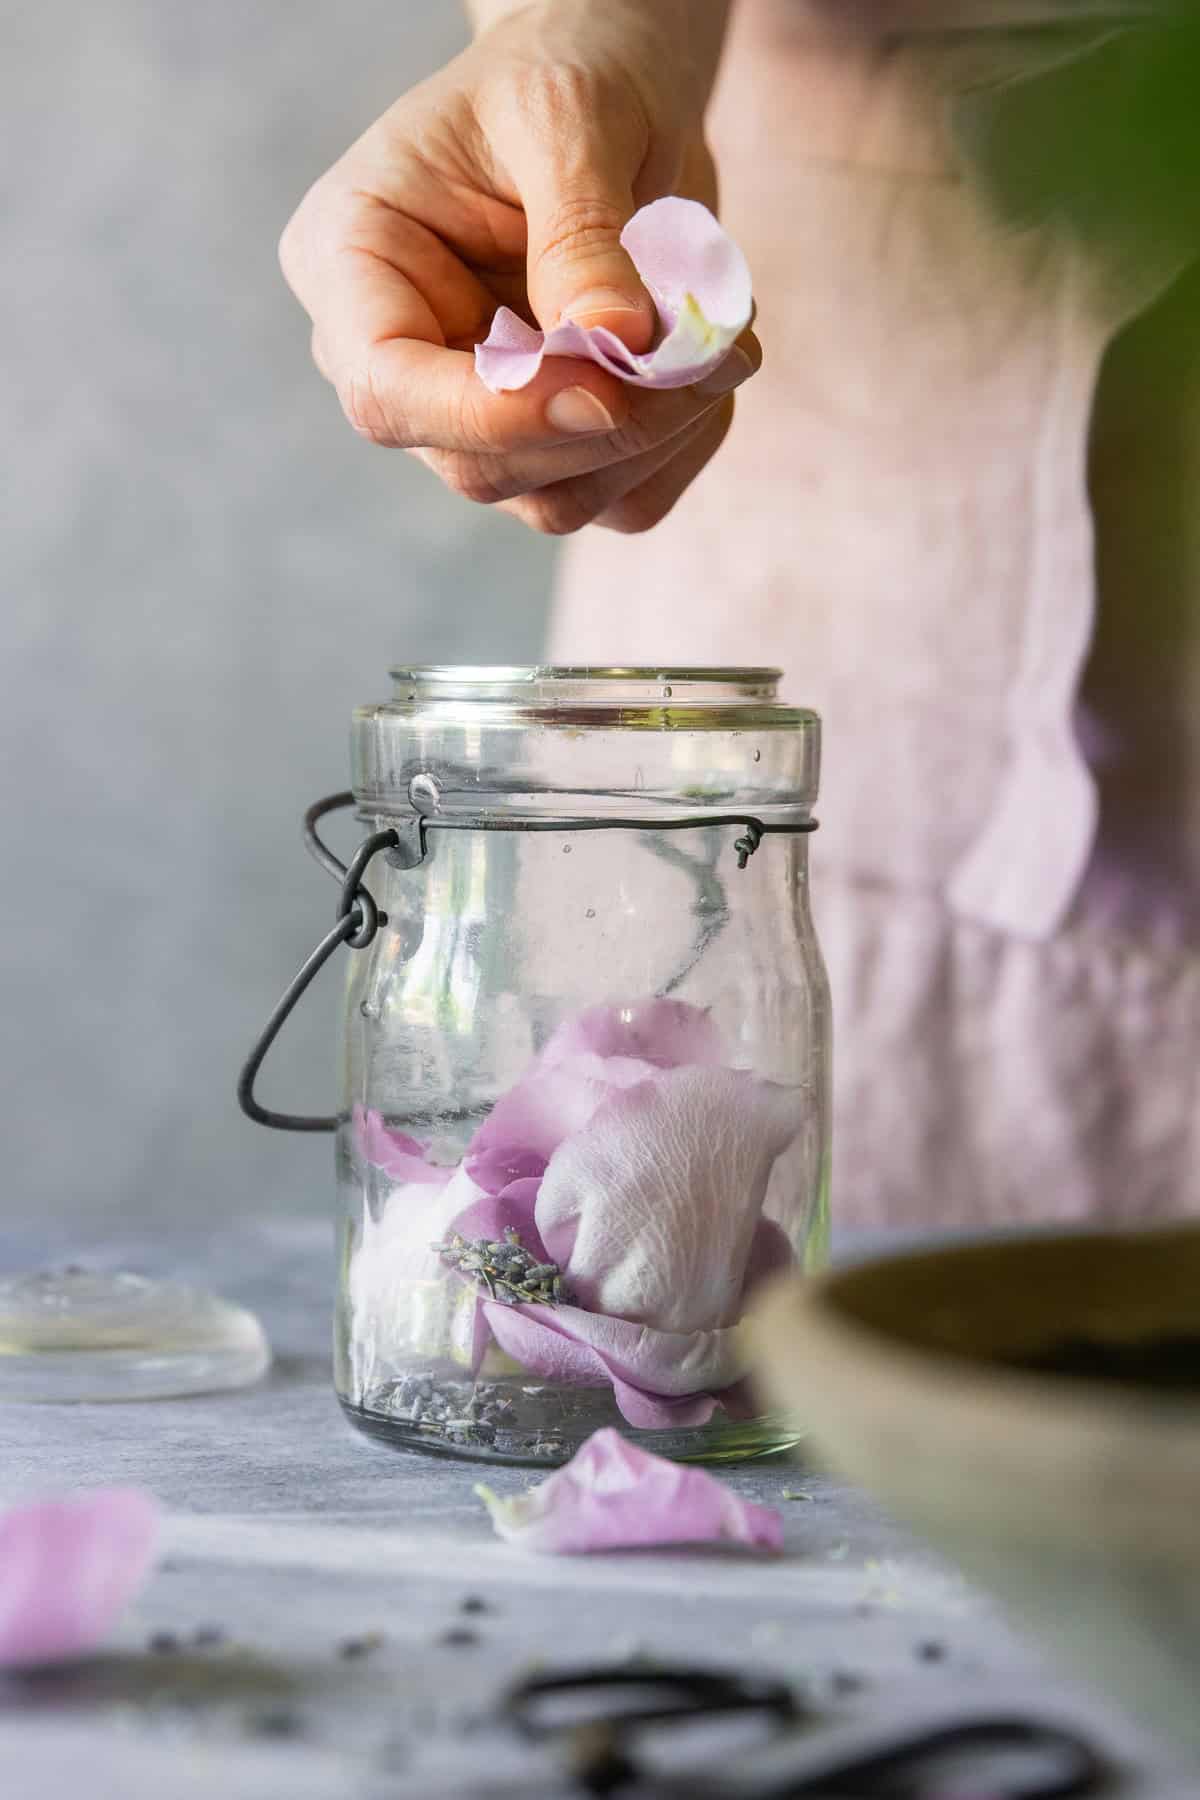 Add rose petals to jar for making perfume oil